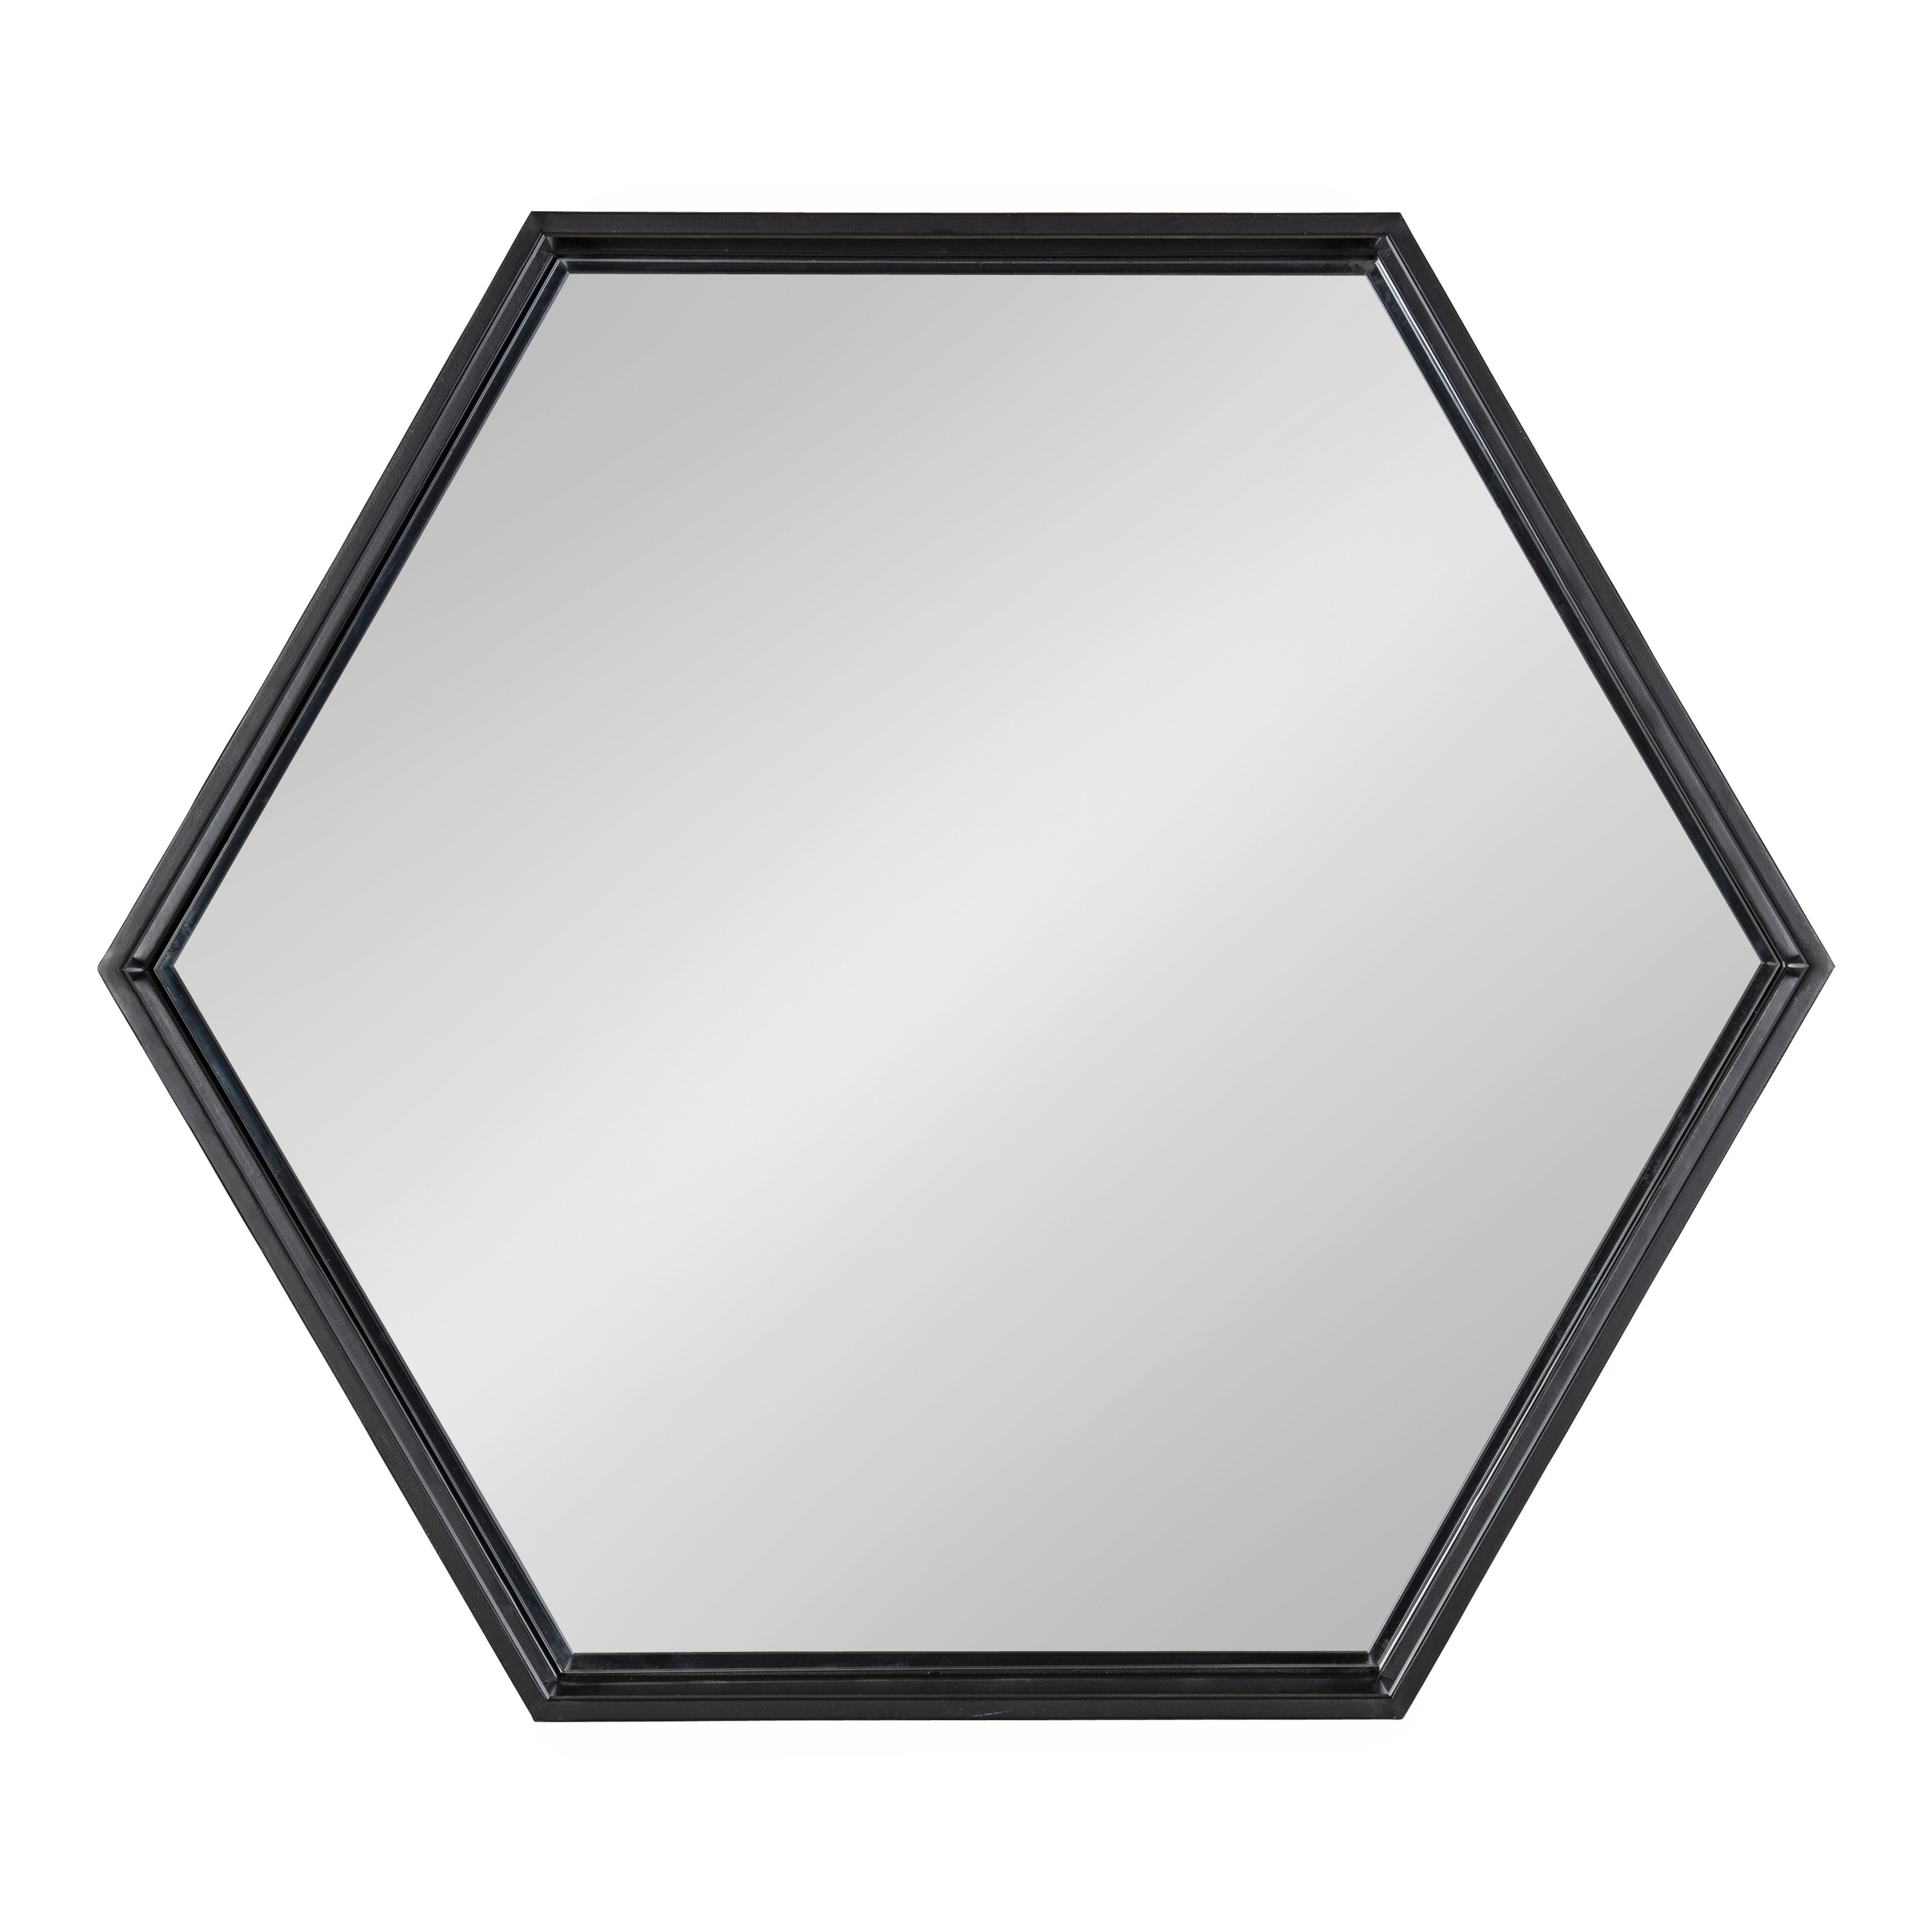 Kate and Laurel Felicia 30-in W x 26-in H Hexagon Black Framed Wall ...